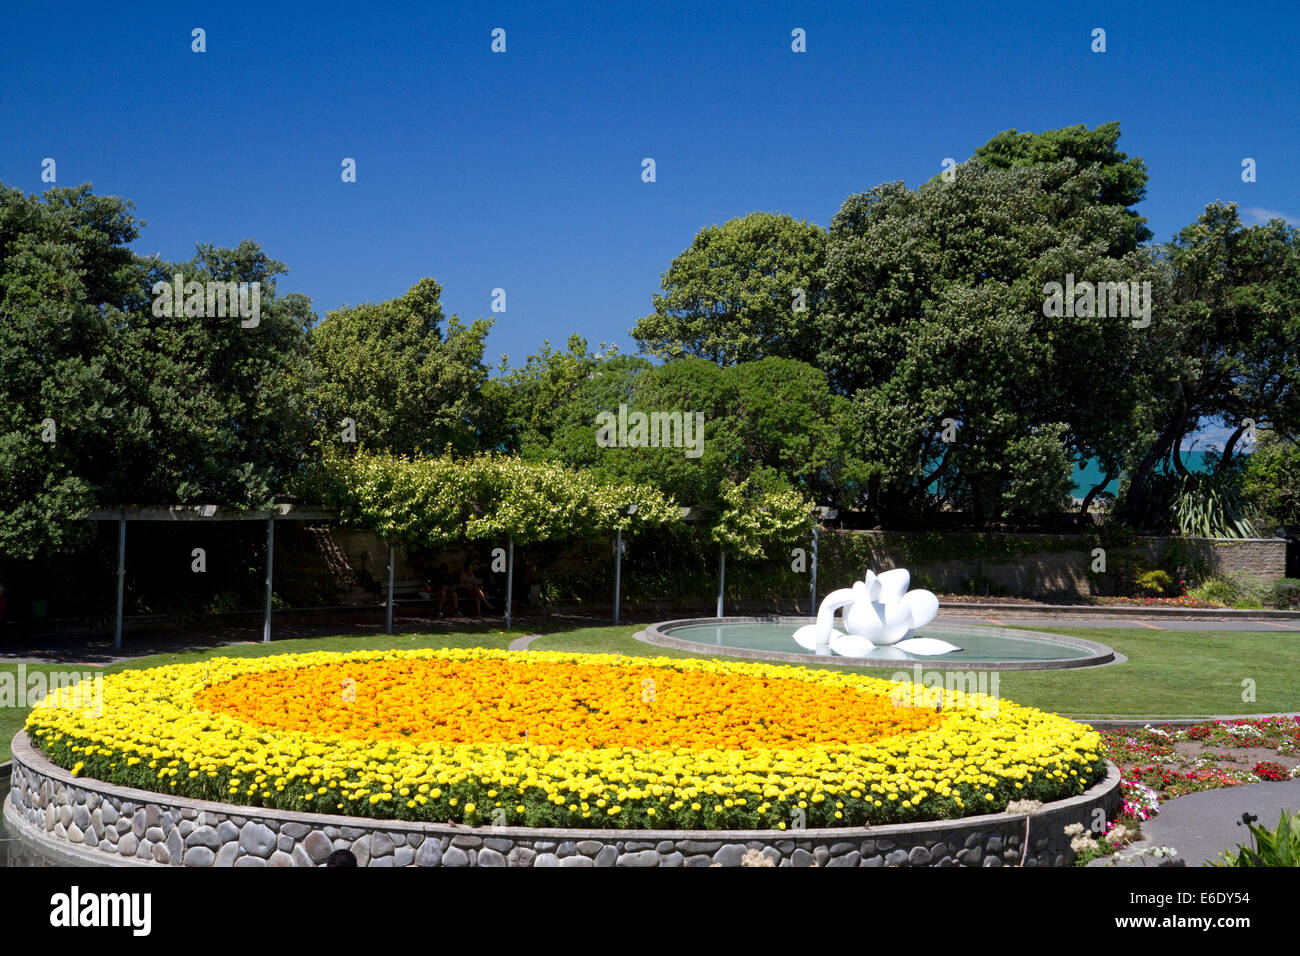 Round flower display and public art along the Marine Parade at Napier in the Hawke's Bay Region, North Island, New Zealand. Stock Photo